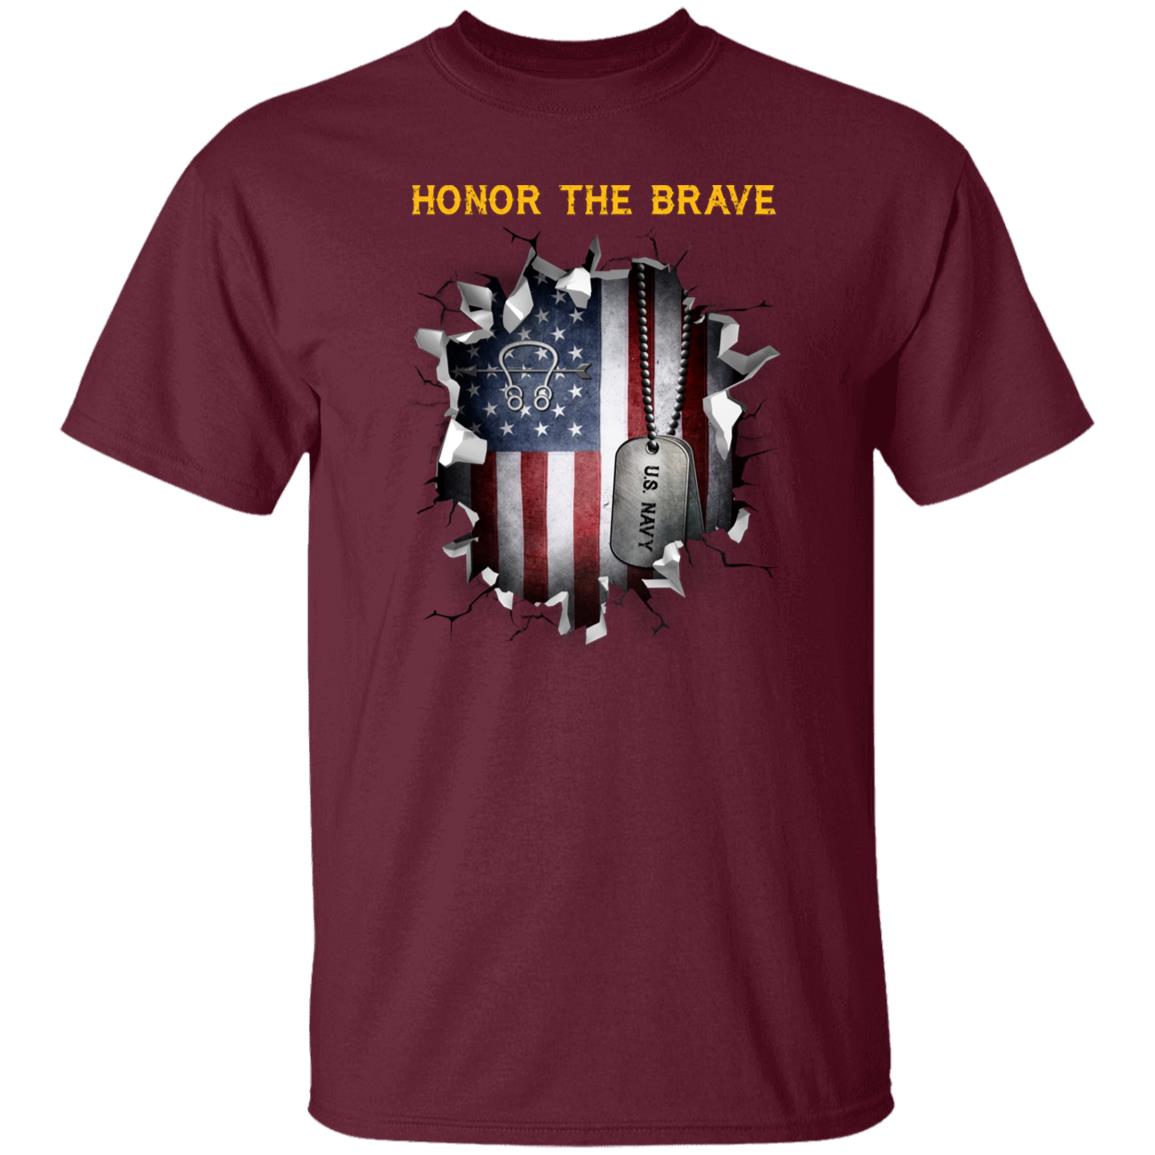 Navy Sonar Technician Navy ST - Honor The Brave Front Shirt